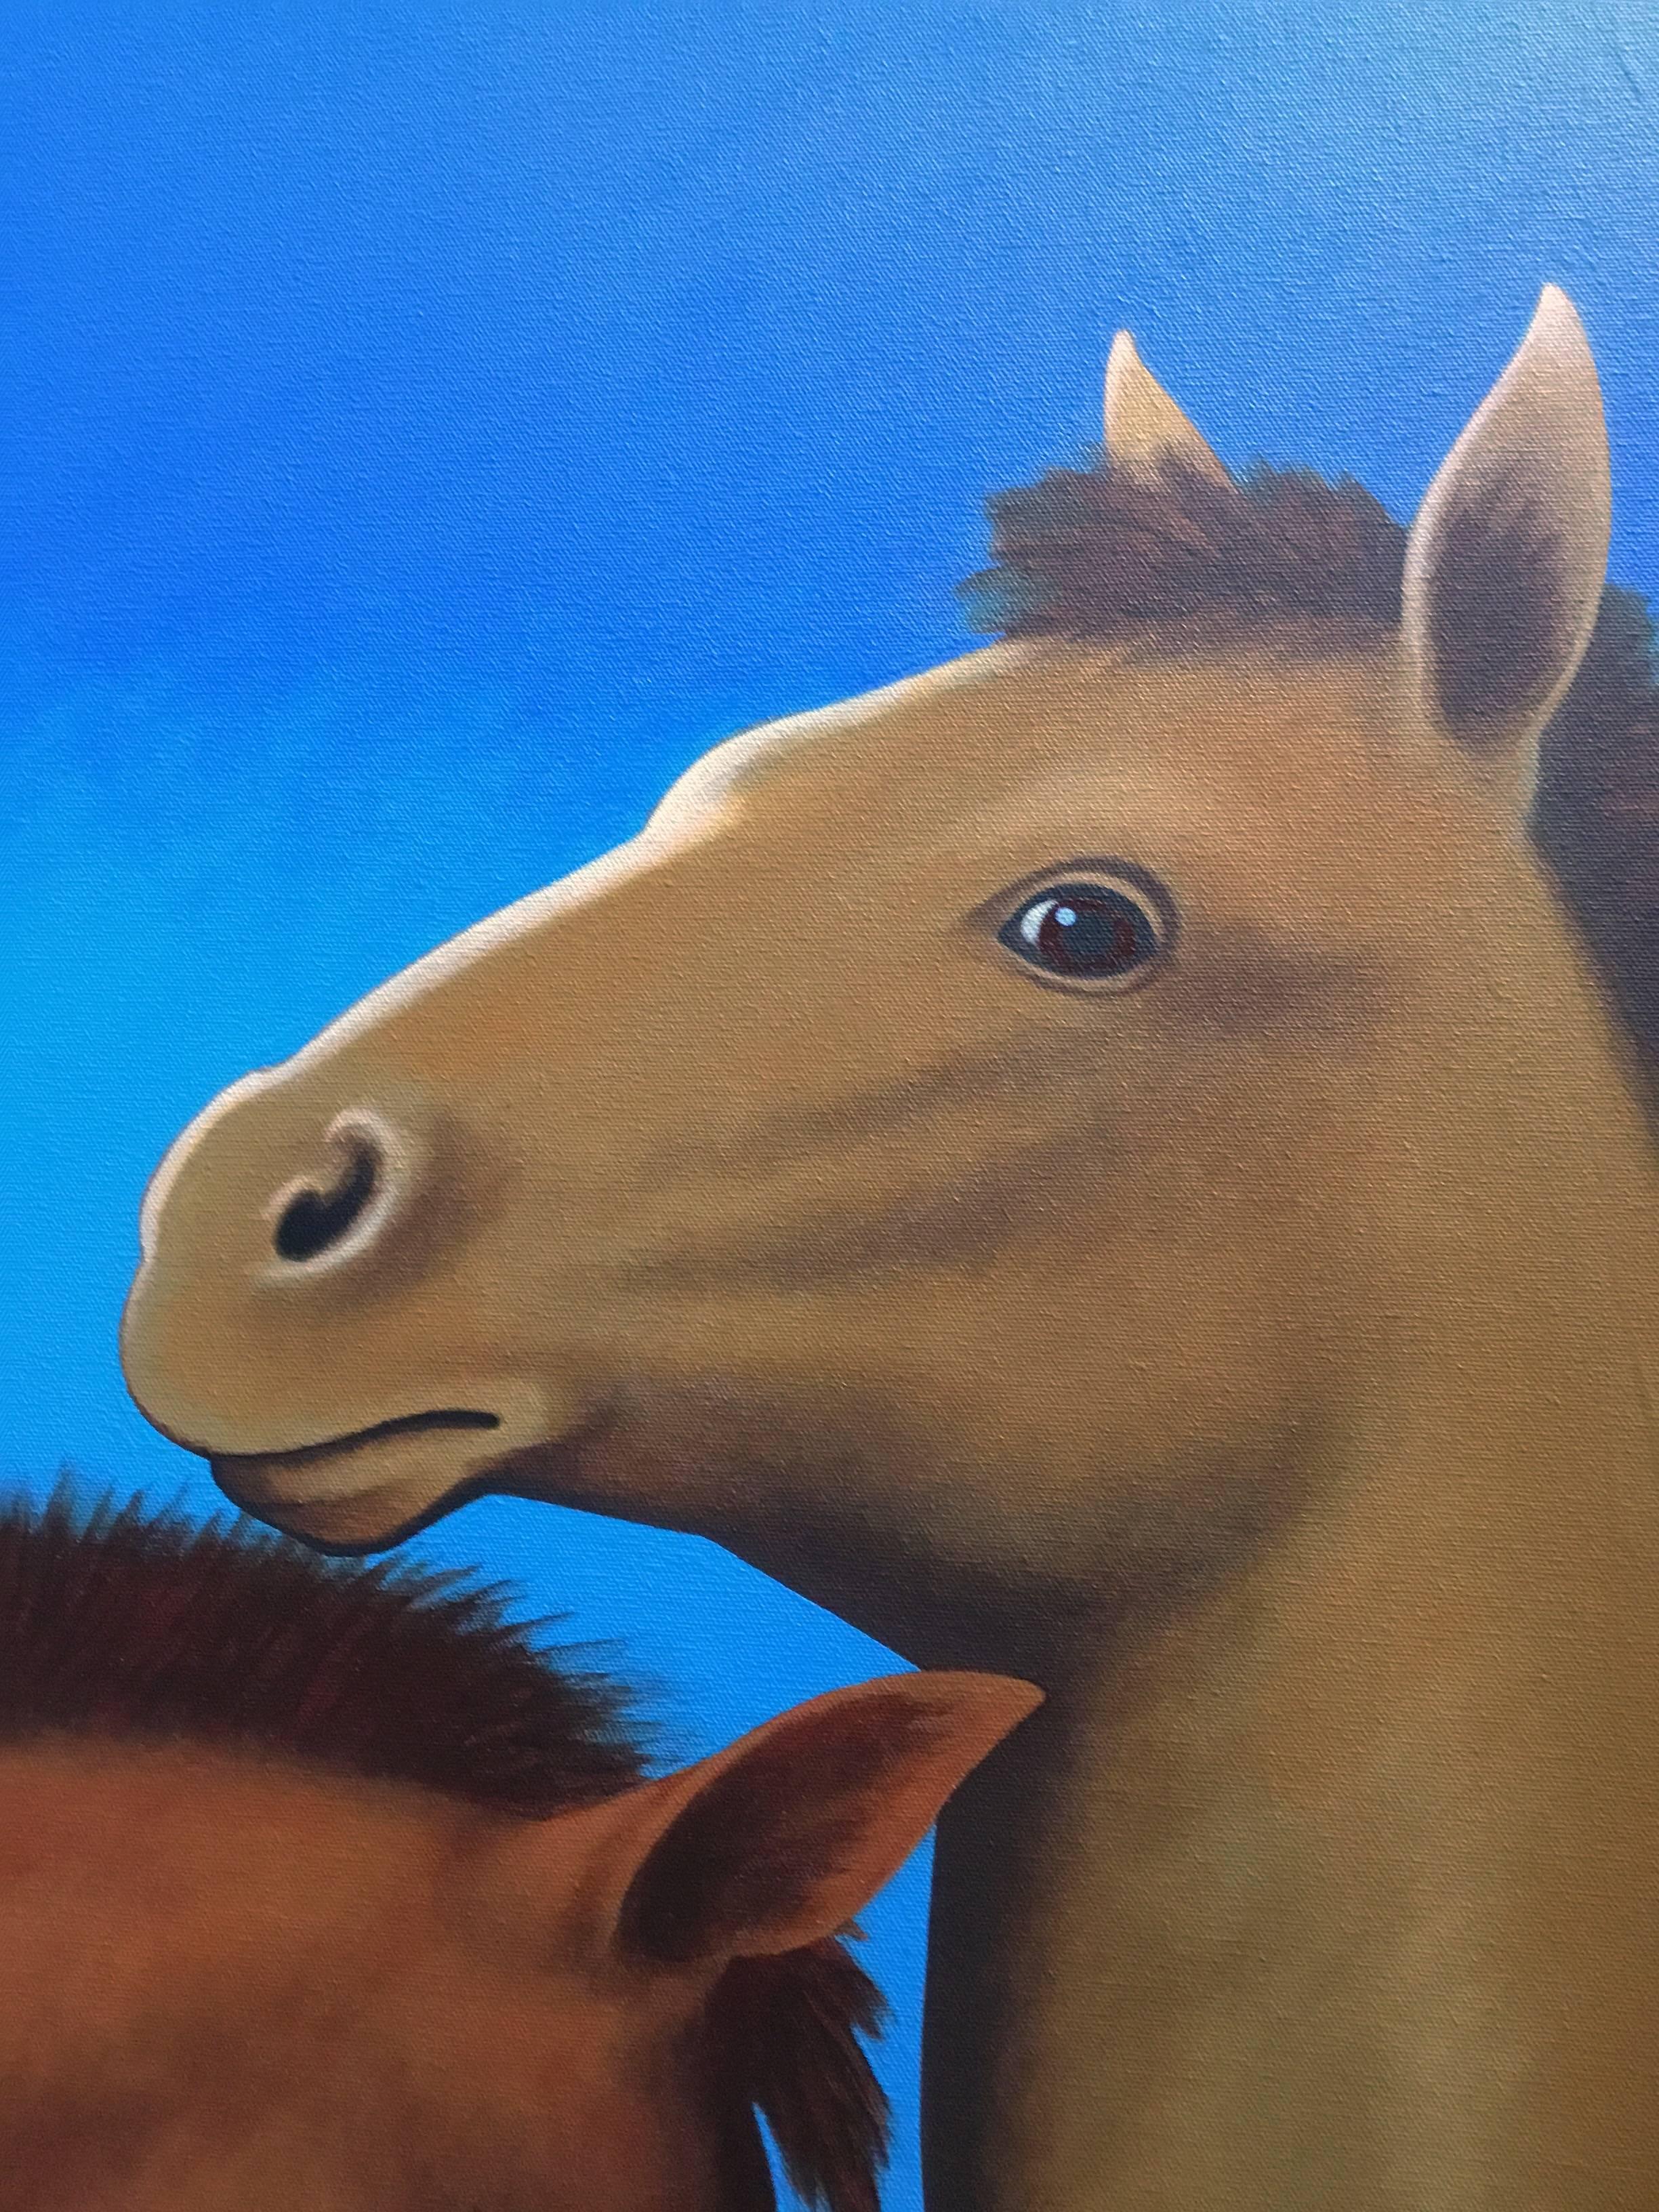 Foals, original painting by Lynn Curlee.
Mr. Curlee is a fine artist as well as an author/illustrator of many award winning books for older children
Acrylic on canvas. Dimensions: 48 x 36 x 1.5
The edges are finished and painted so that framing